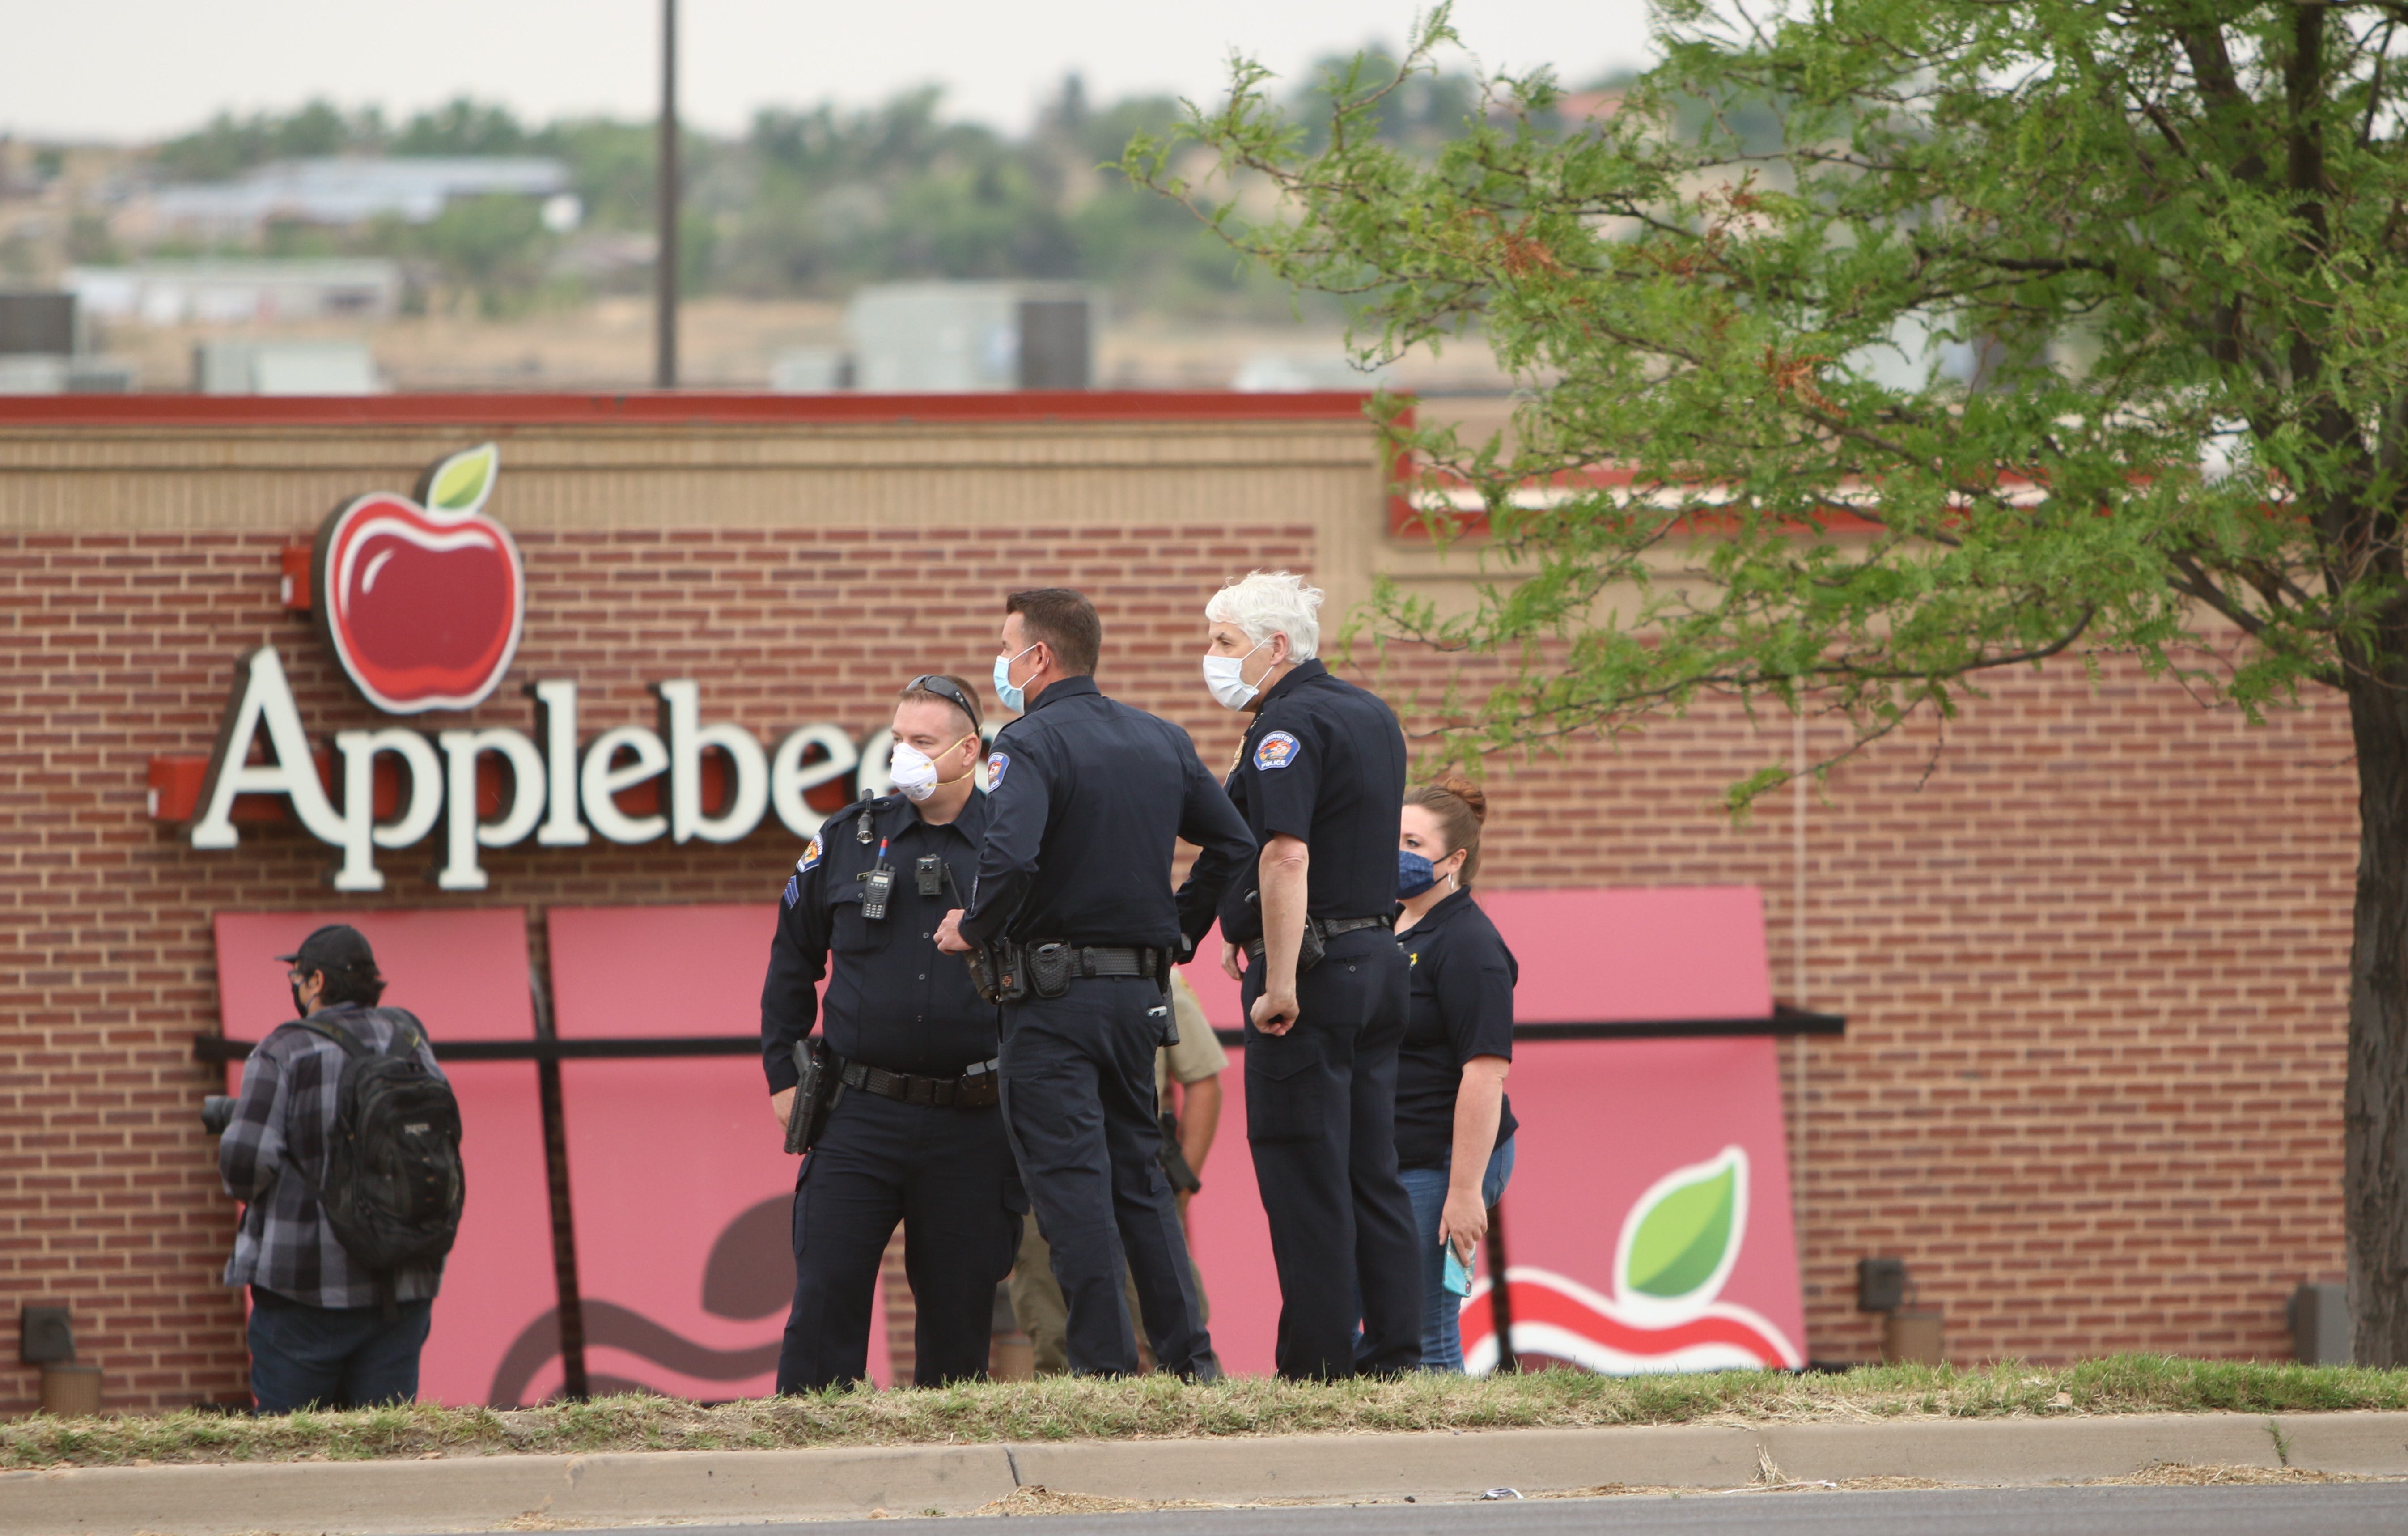 Farmington Police Chief Steve Hebbe, right, stands with officers during a protest on June 1 near Animas Valley Mall that called for justice in George Floyd's death in Minneapolis.